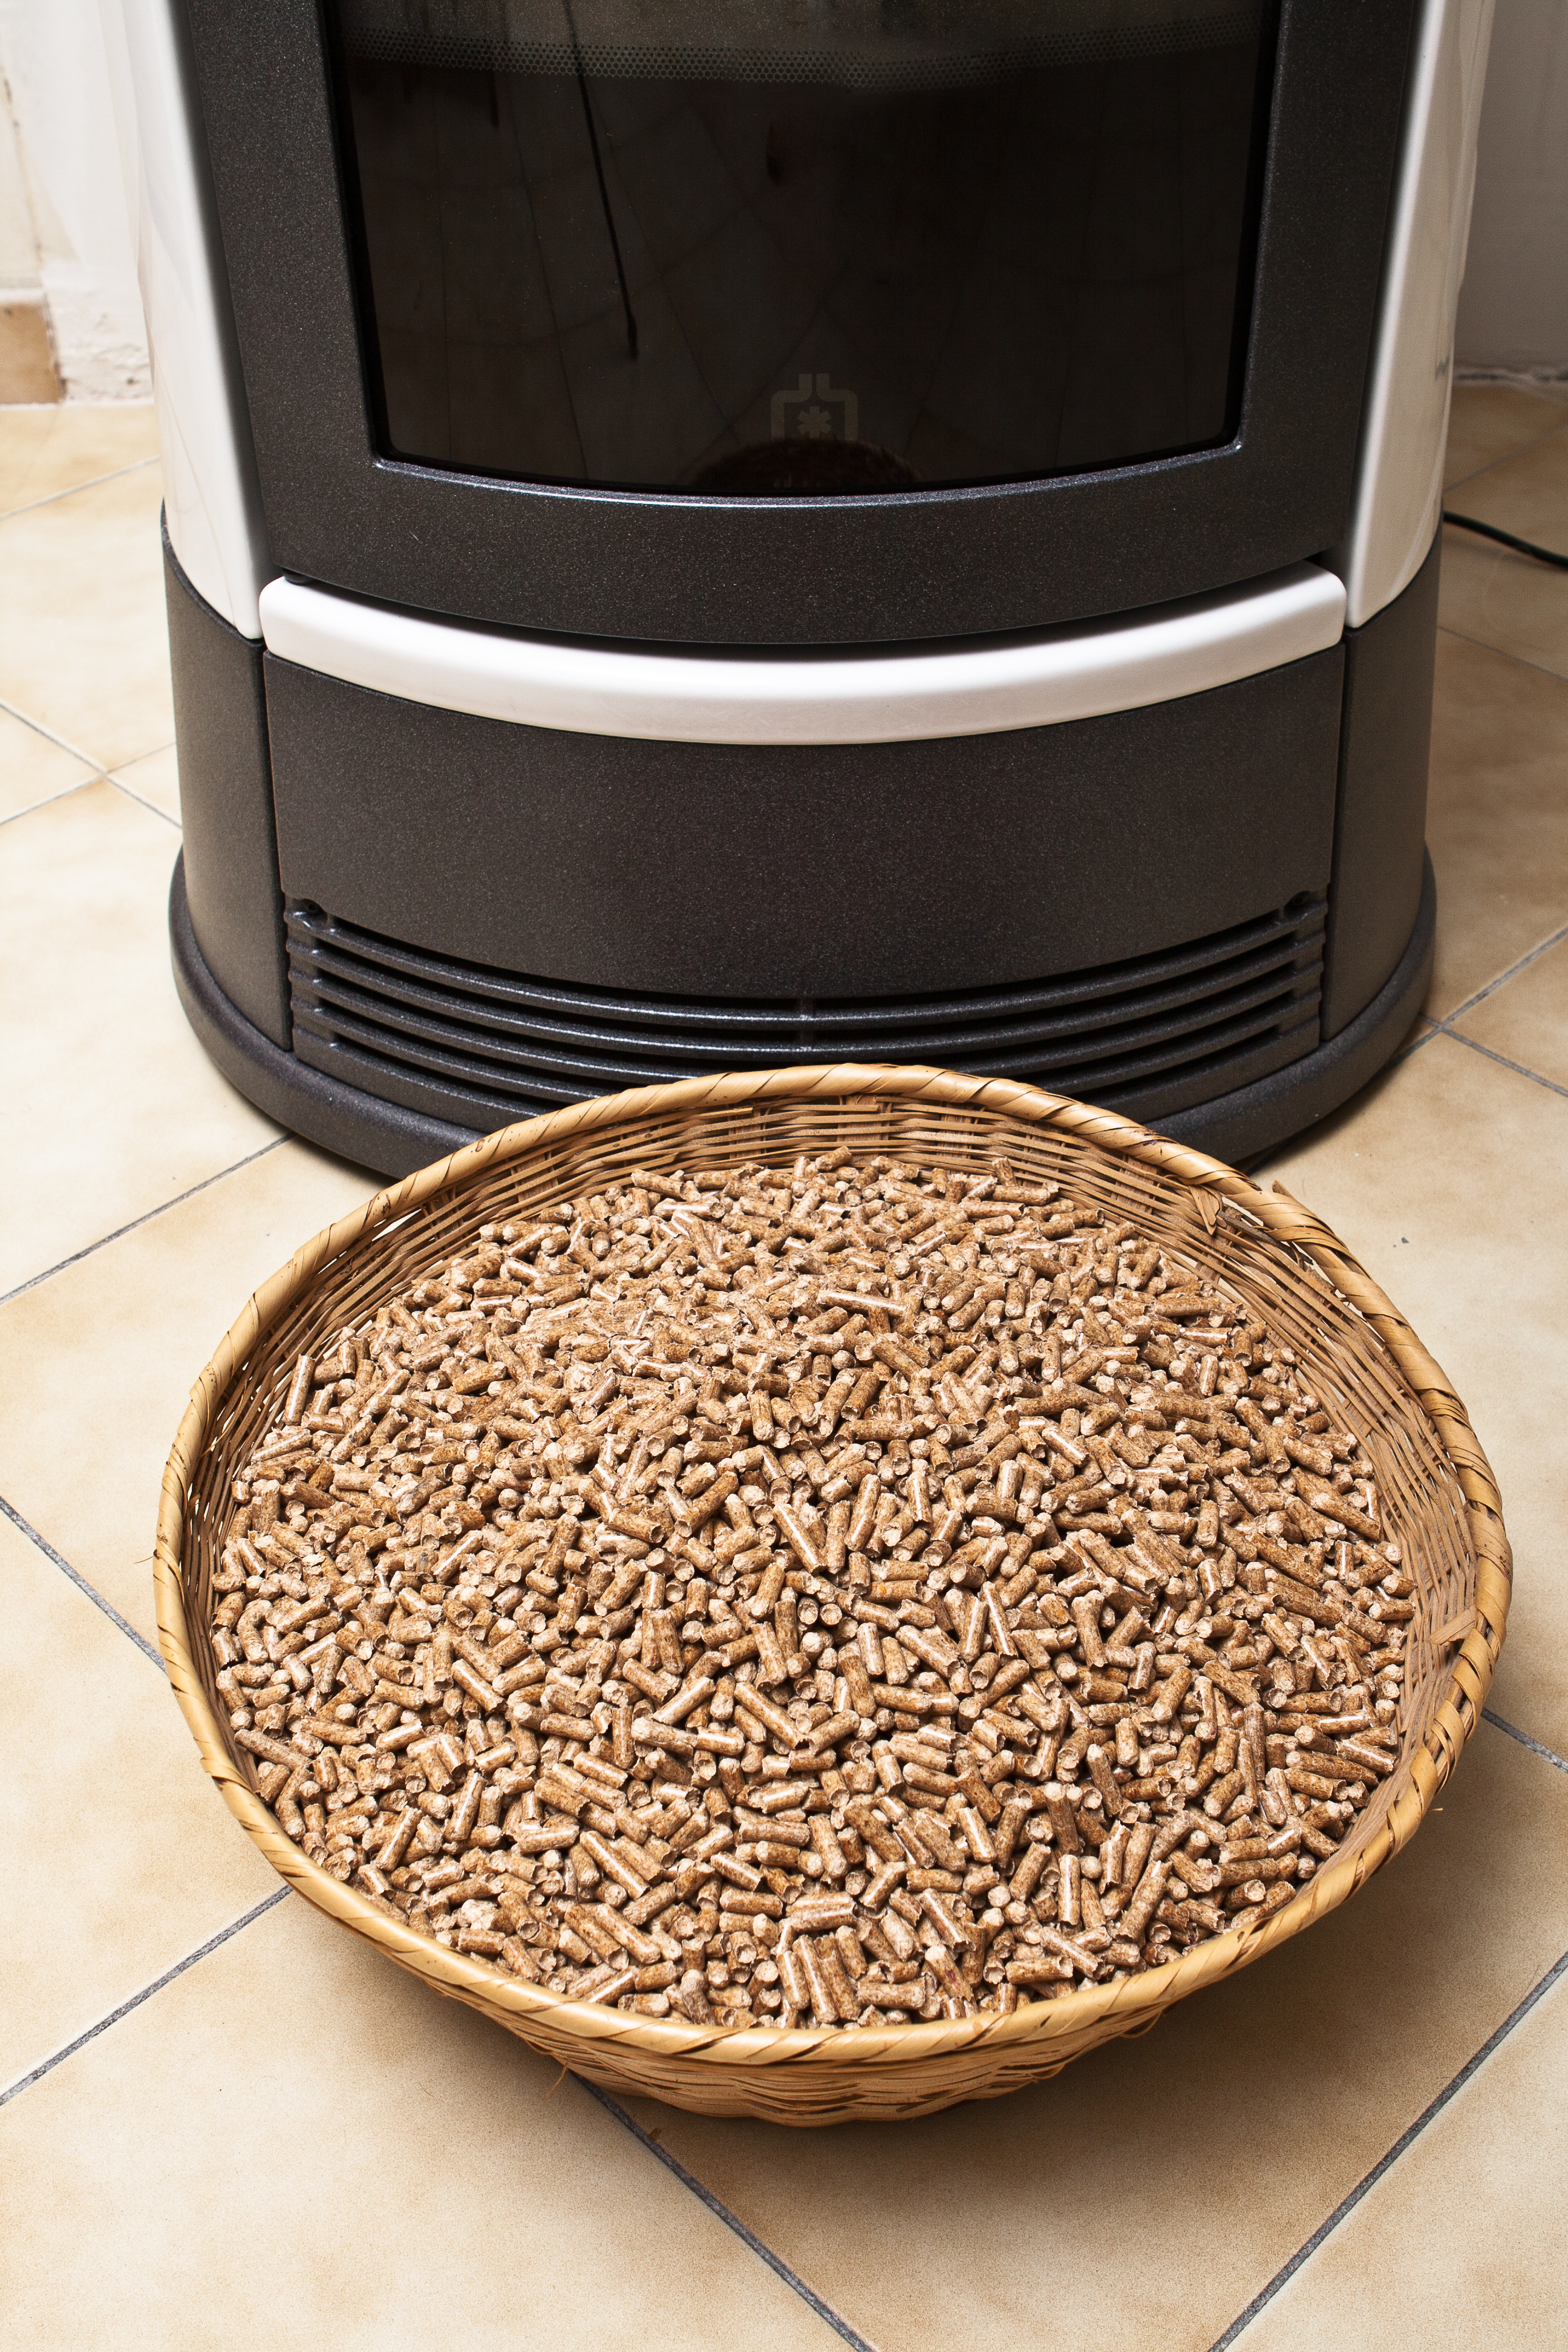 wood-heat-vs-pellet-stove-what-s-the-difference-best-pellet-stove